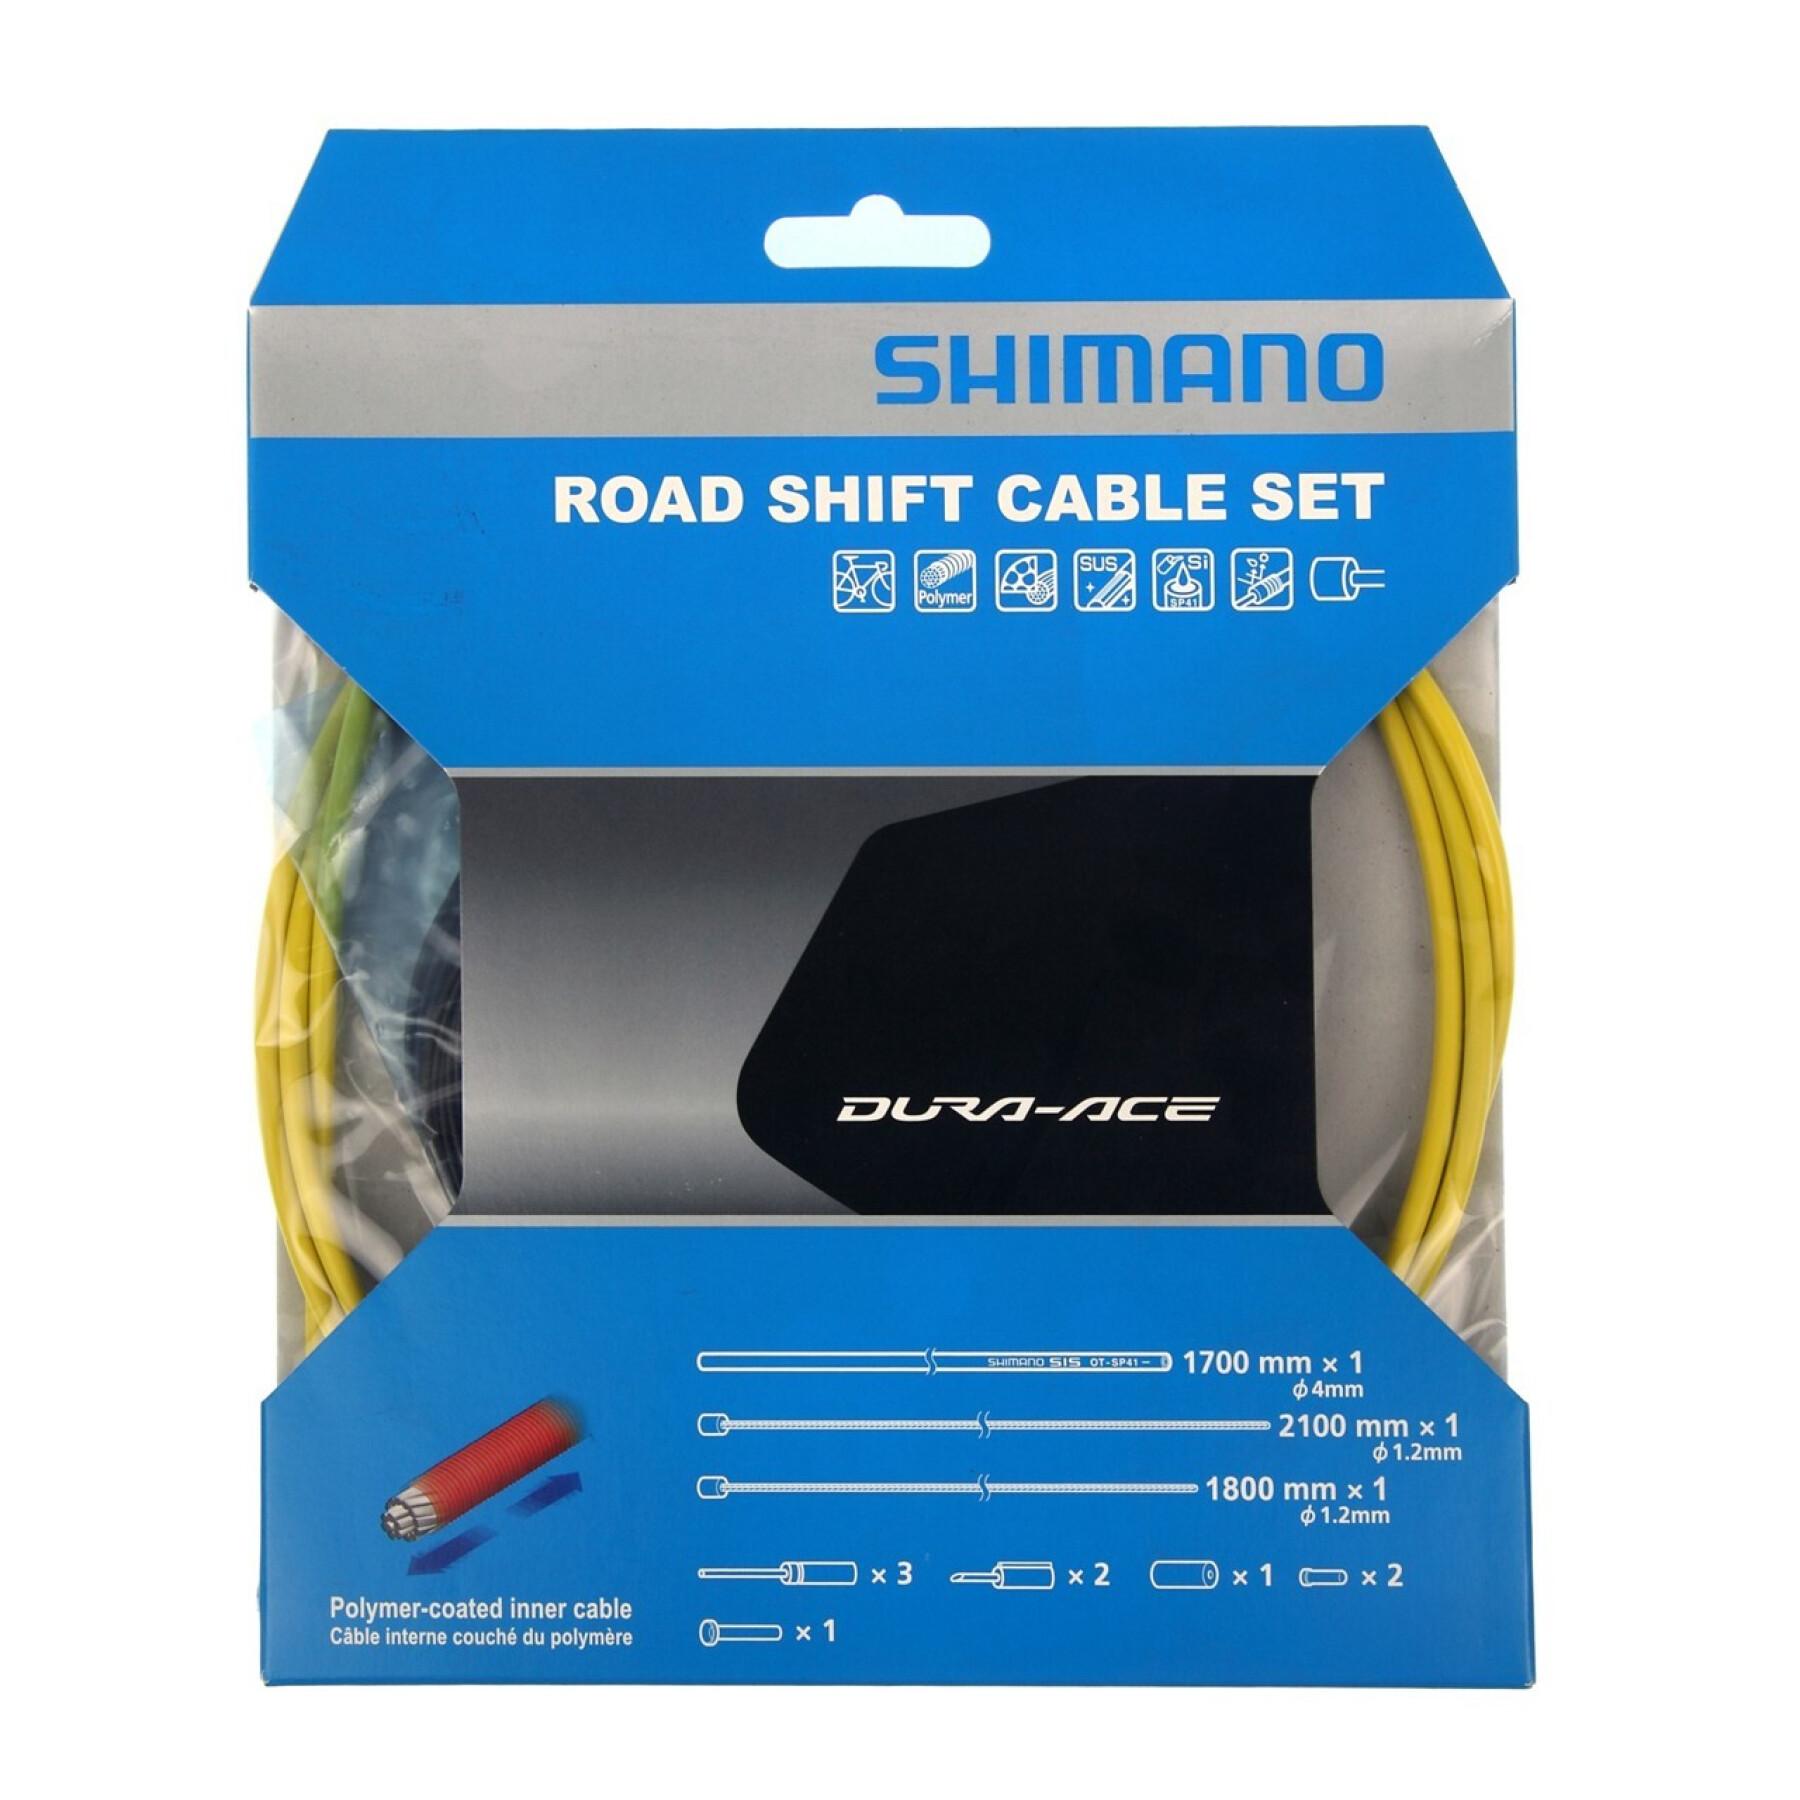 Polymer-coated cable sets and gear shift covers Shimano OT-SP41